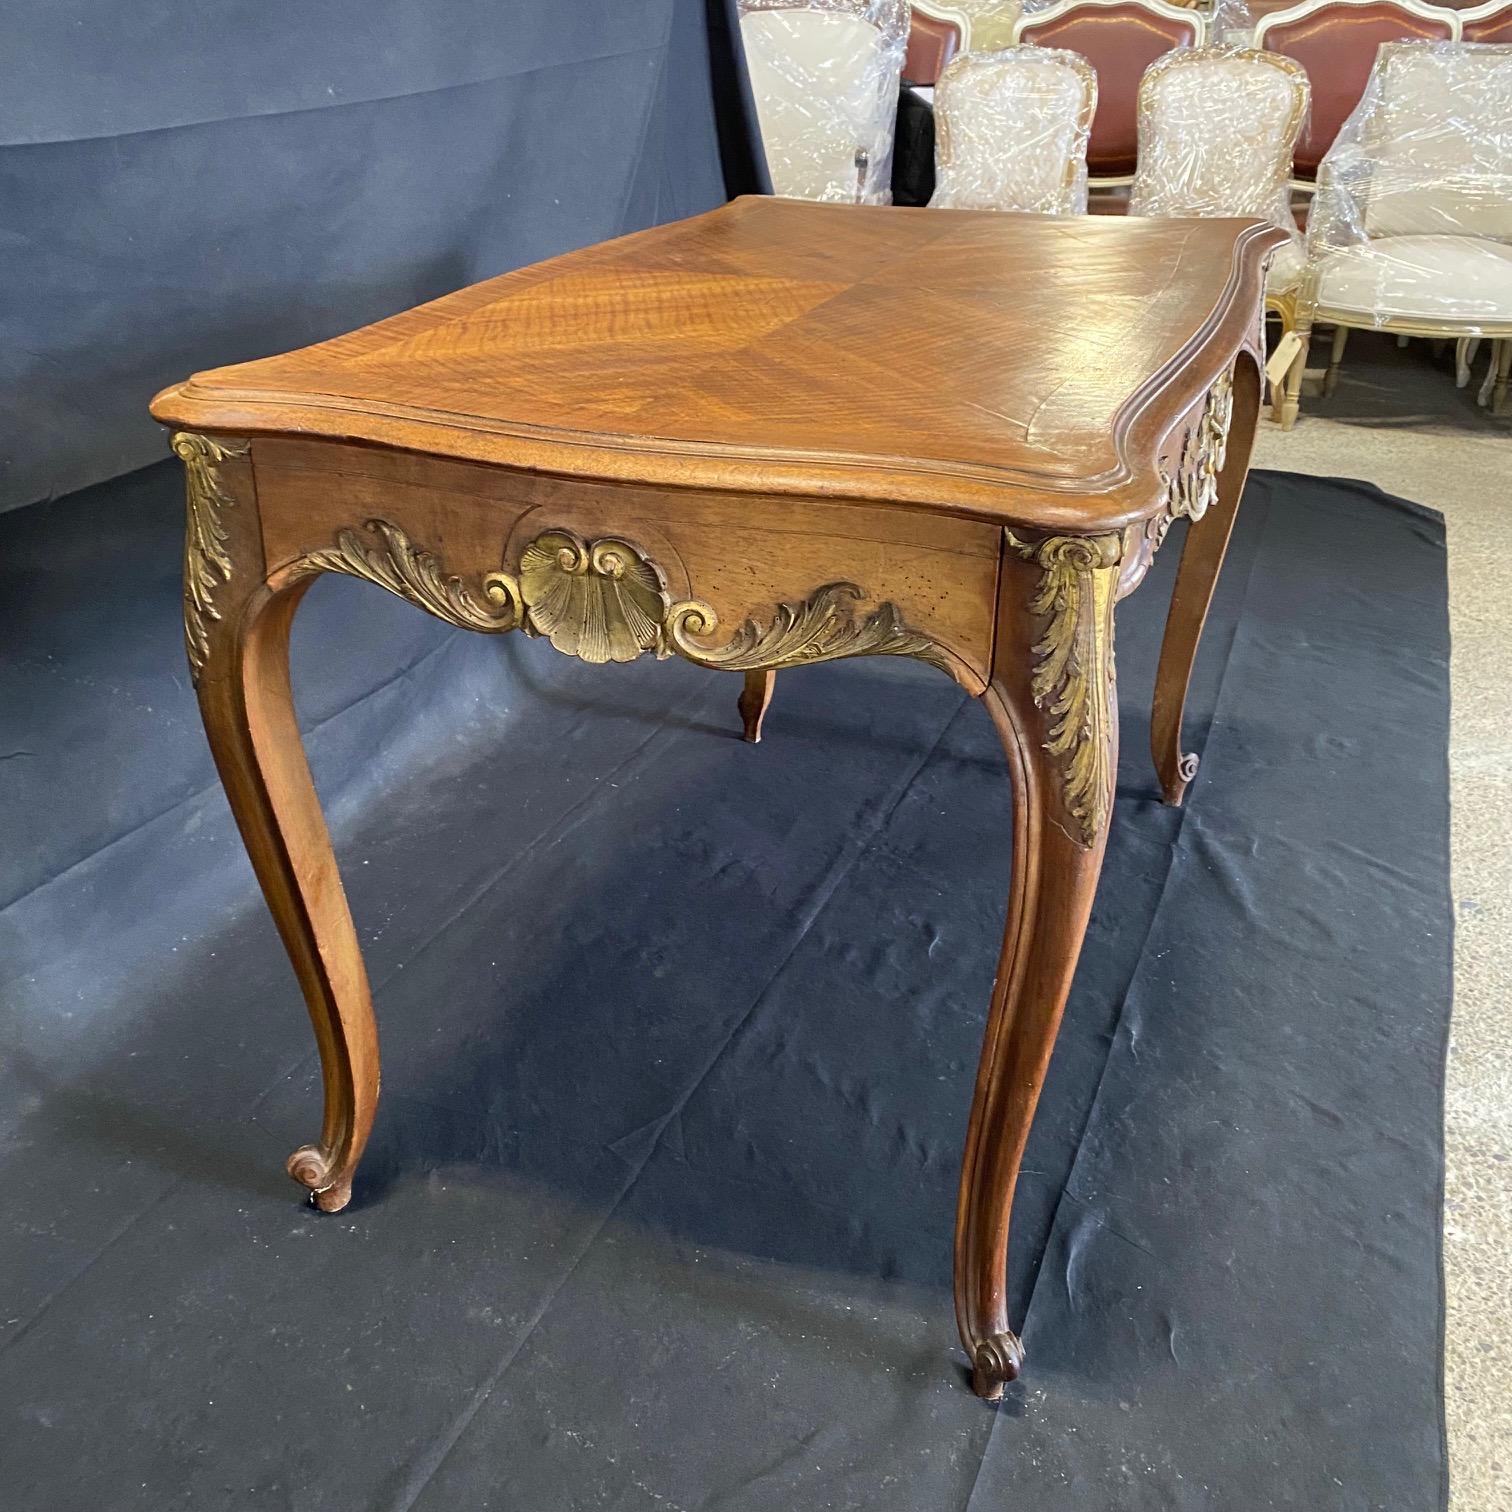 Very rare French Louis XV table with original gold gilt paint. Multi functional versatlle stunning accent table, side table or focal point that can also be used as a dining table or desk. Beautifully carved acanthus leaves and other floral details